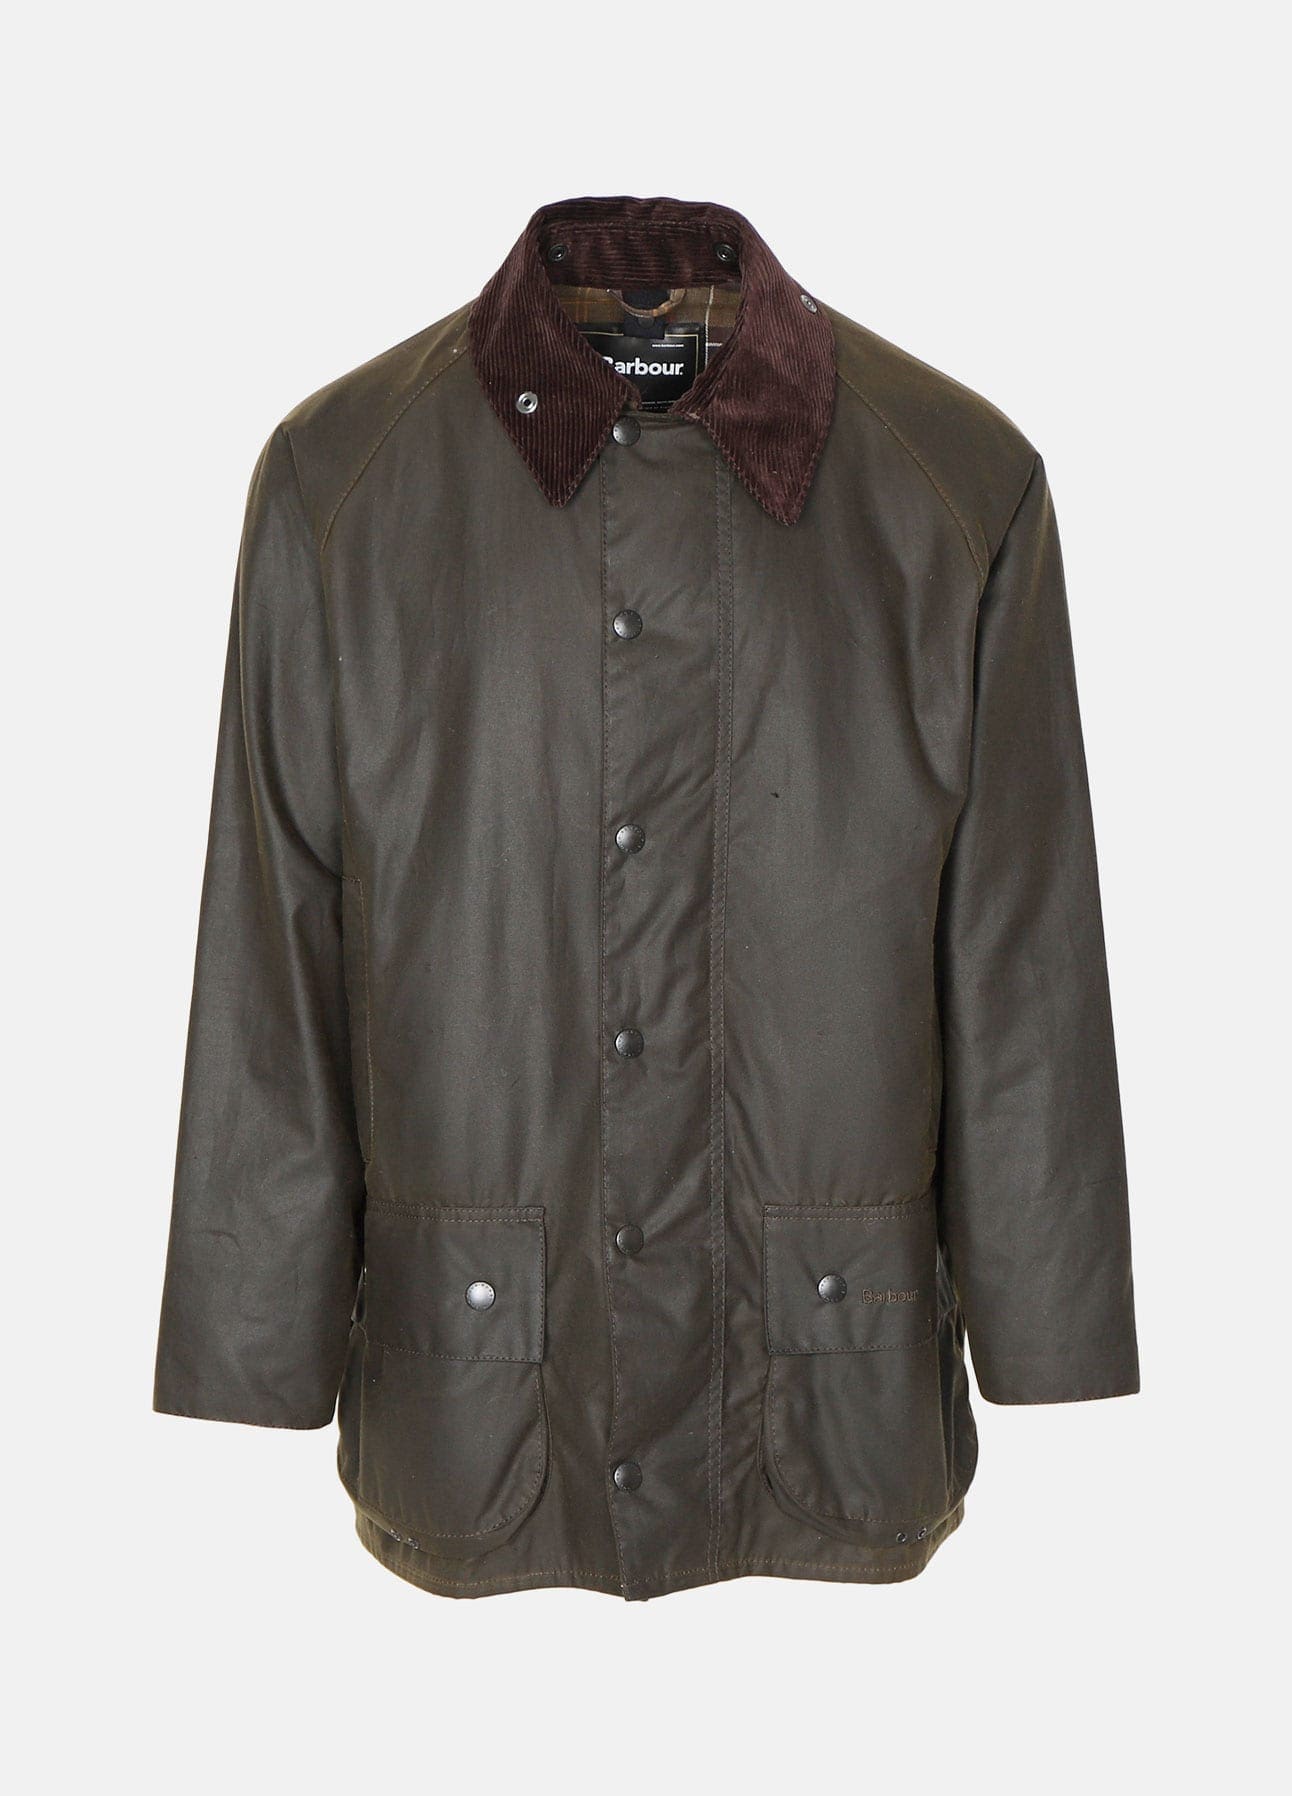 Barbour classic beaufort olive